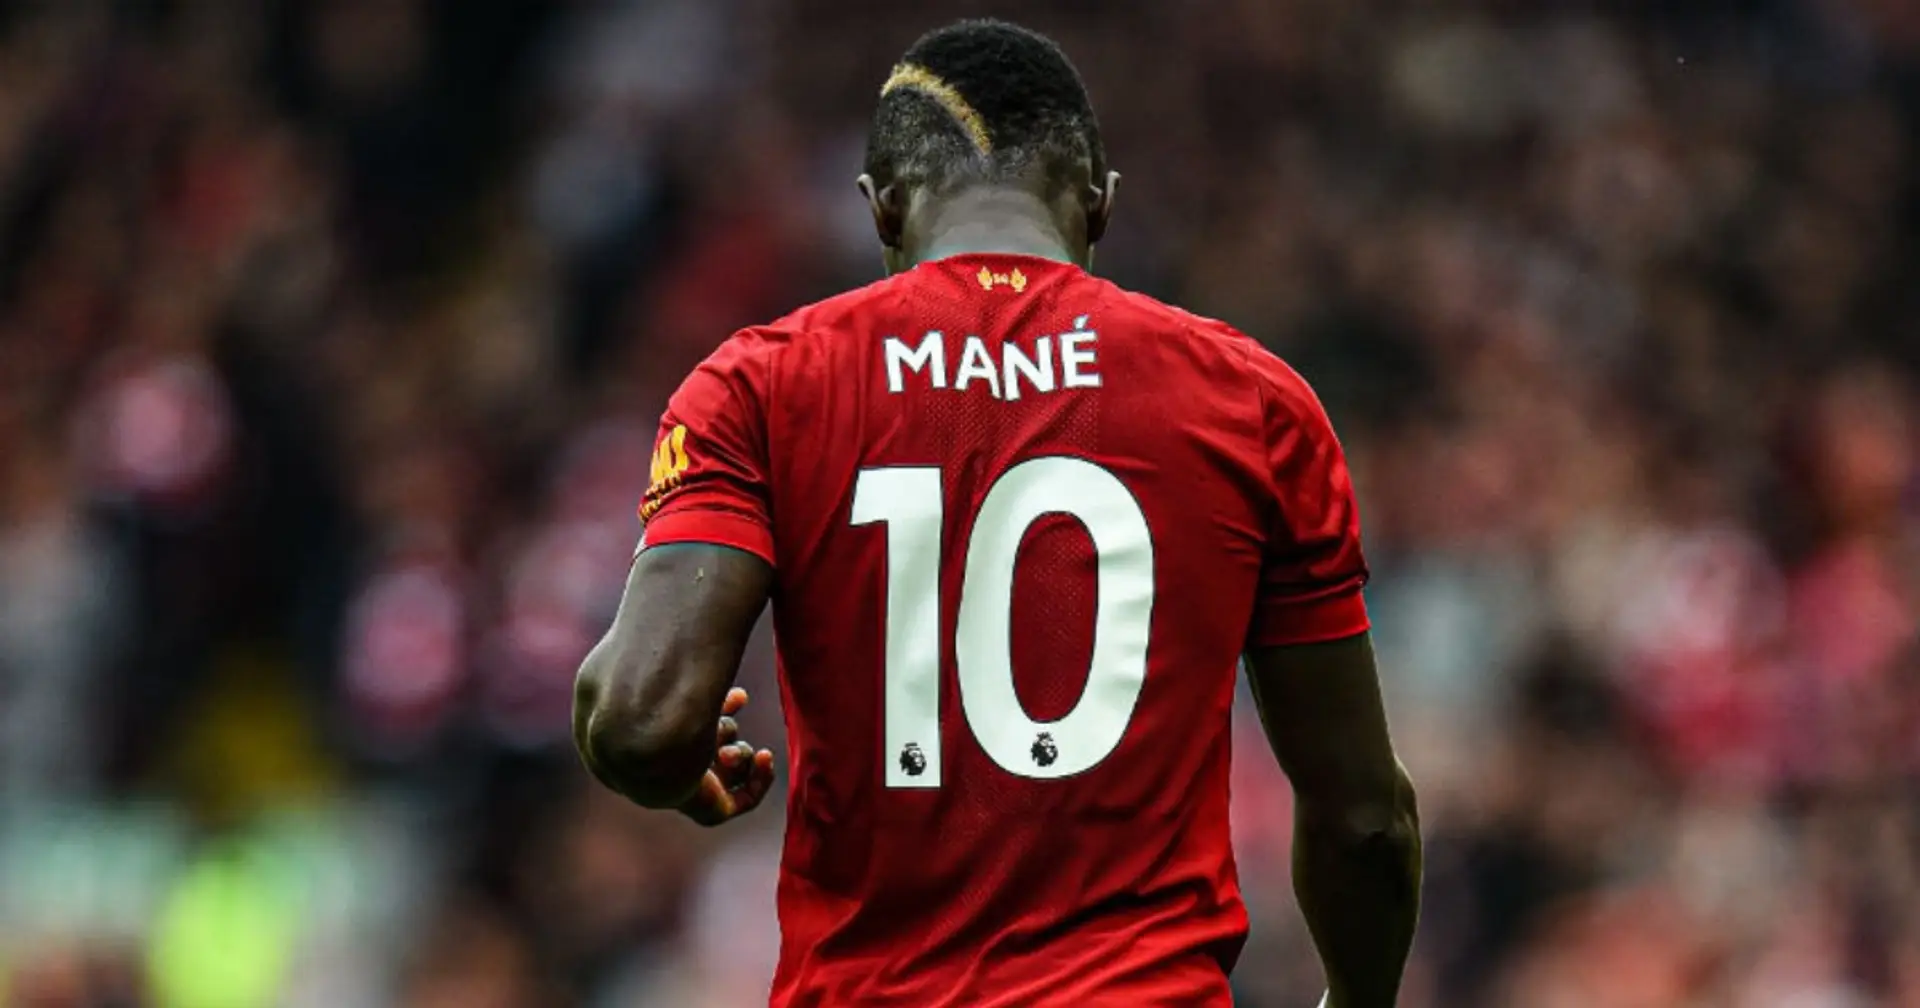 OFFICIAL: Liverpool announce Mane's departure to Bayern Munich